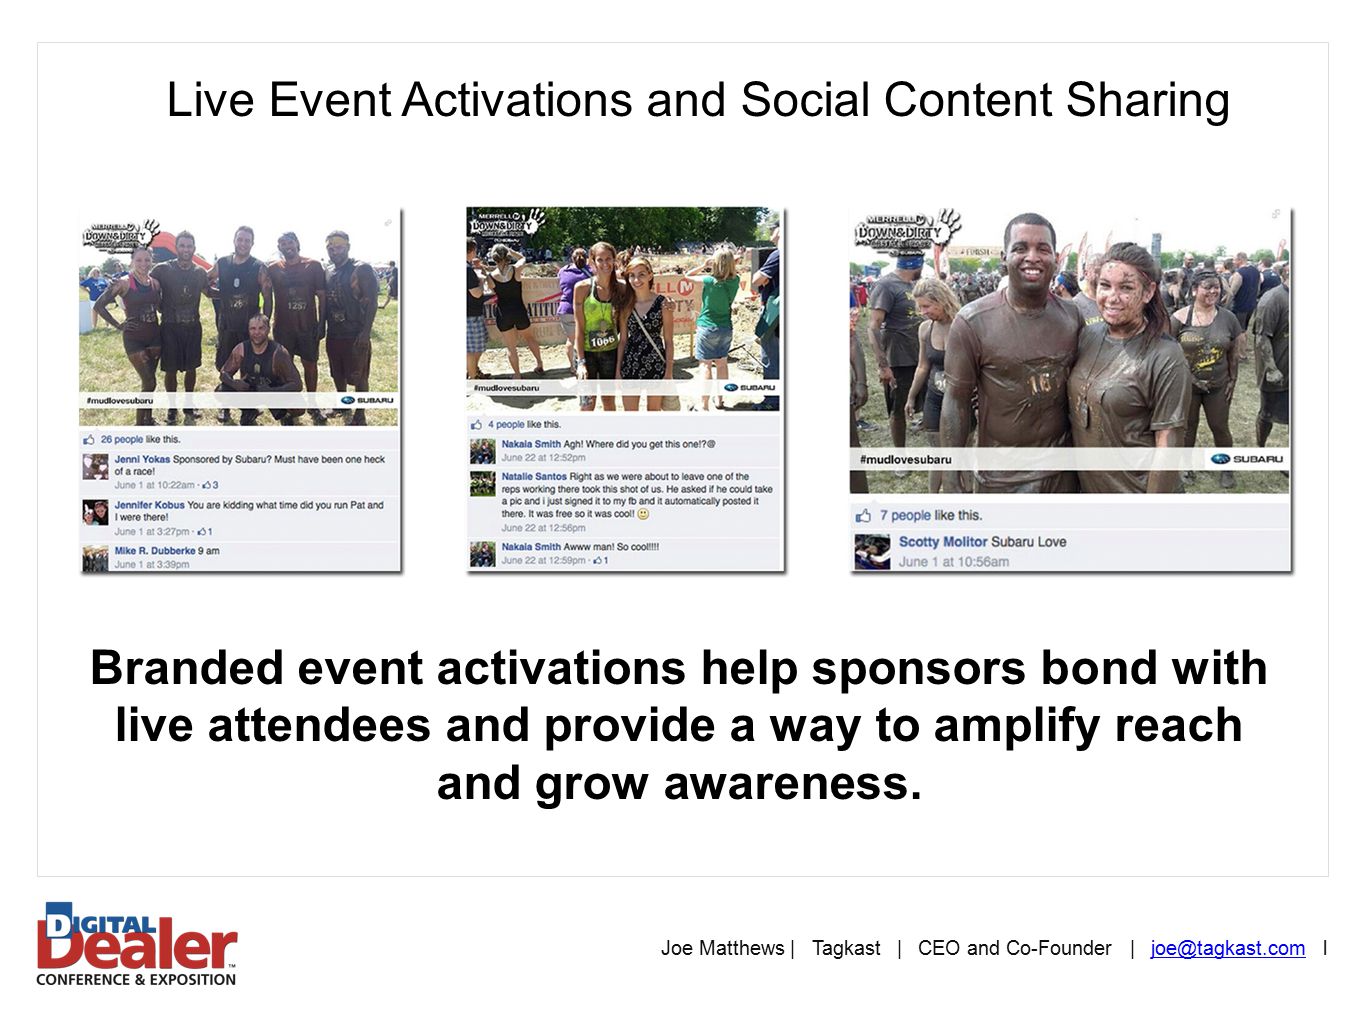 Joe Matthews | Tagkast | CEO and Co-Founder |  Live Event Activations and Social Content Sharing Branded event activations help sponsors bond with live attendees and provide a way to amplify reach and grow awareness.